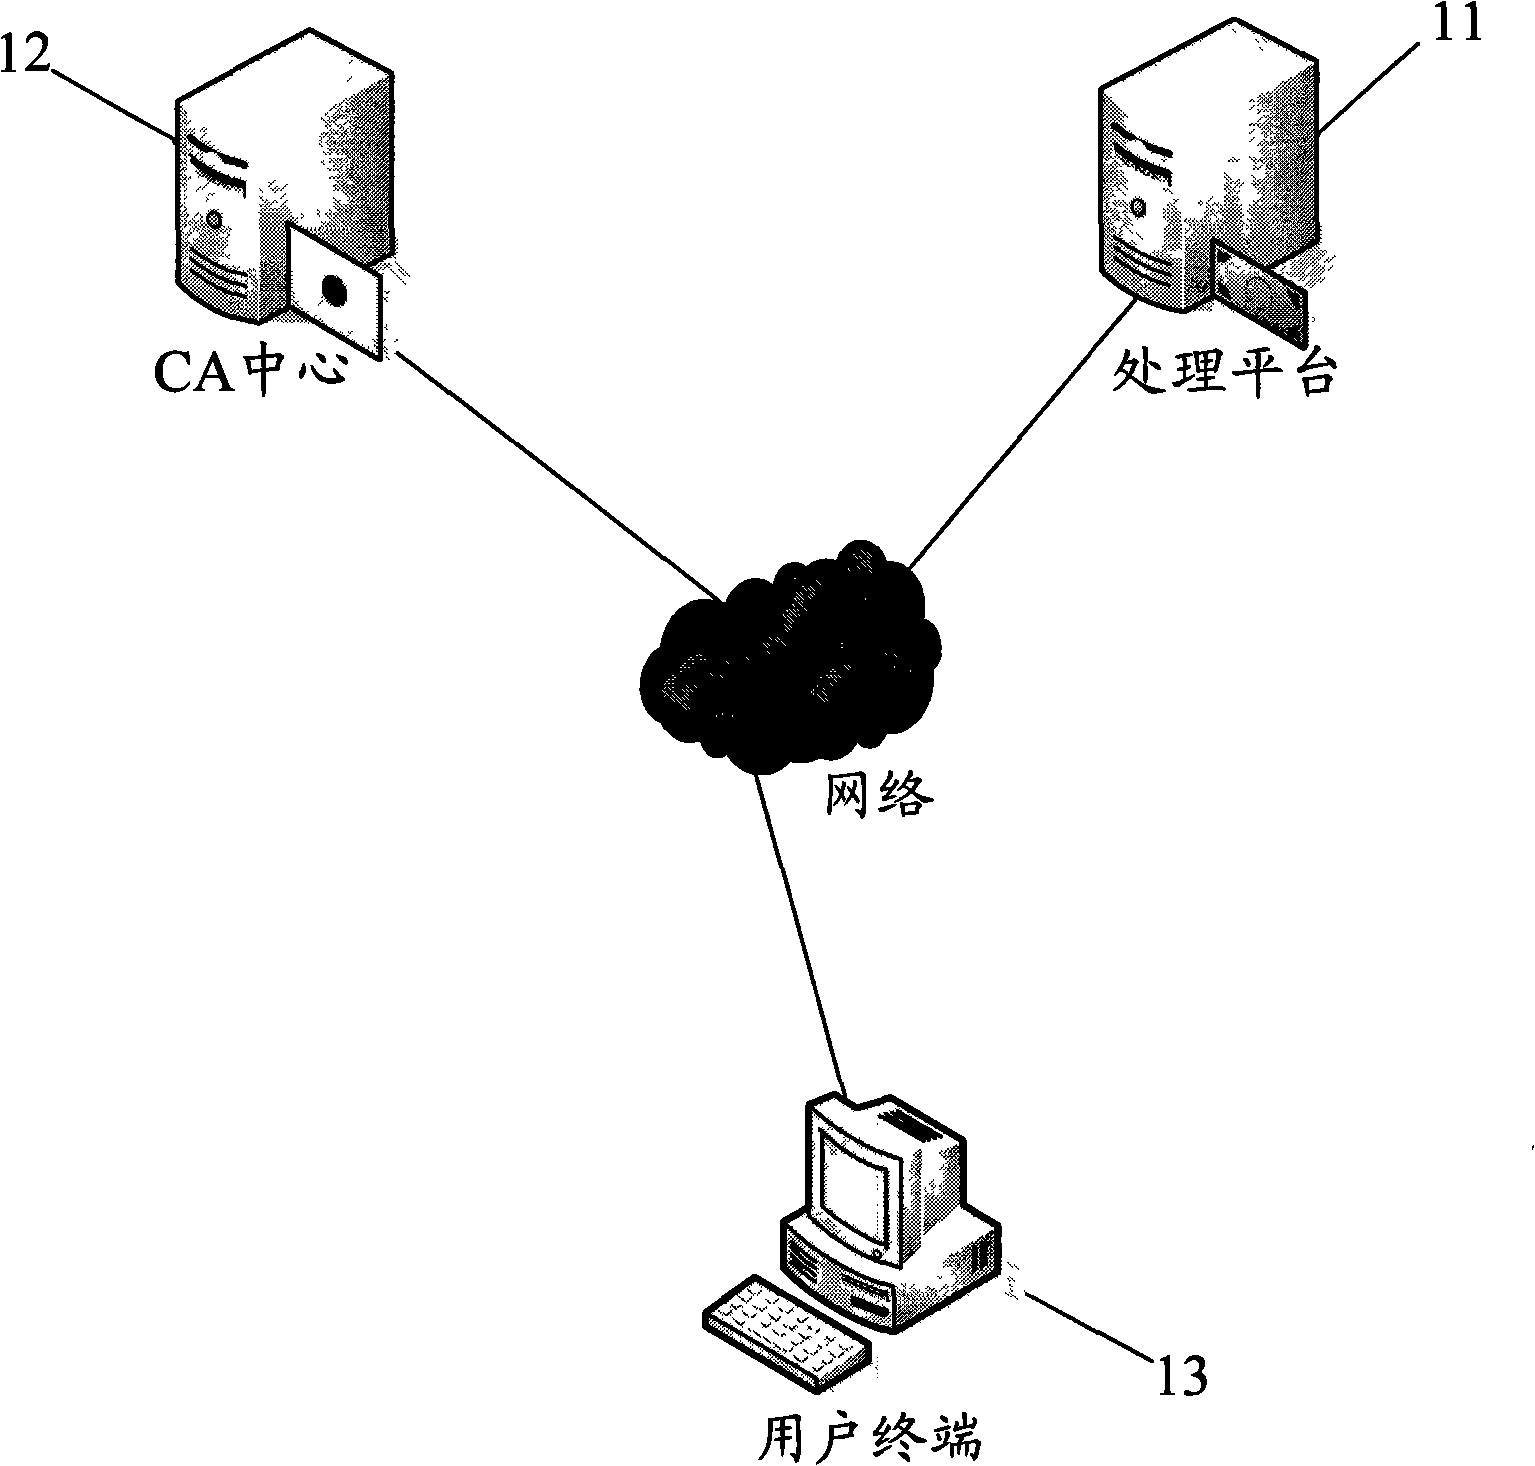 Method and system for identity authentication by finger print USBkey